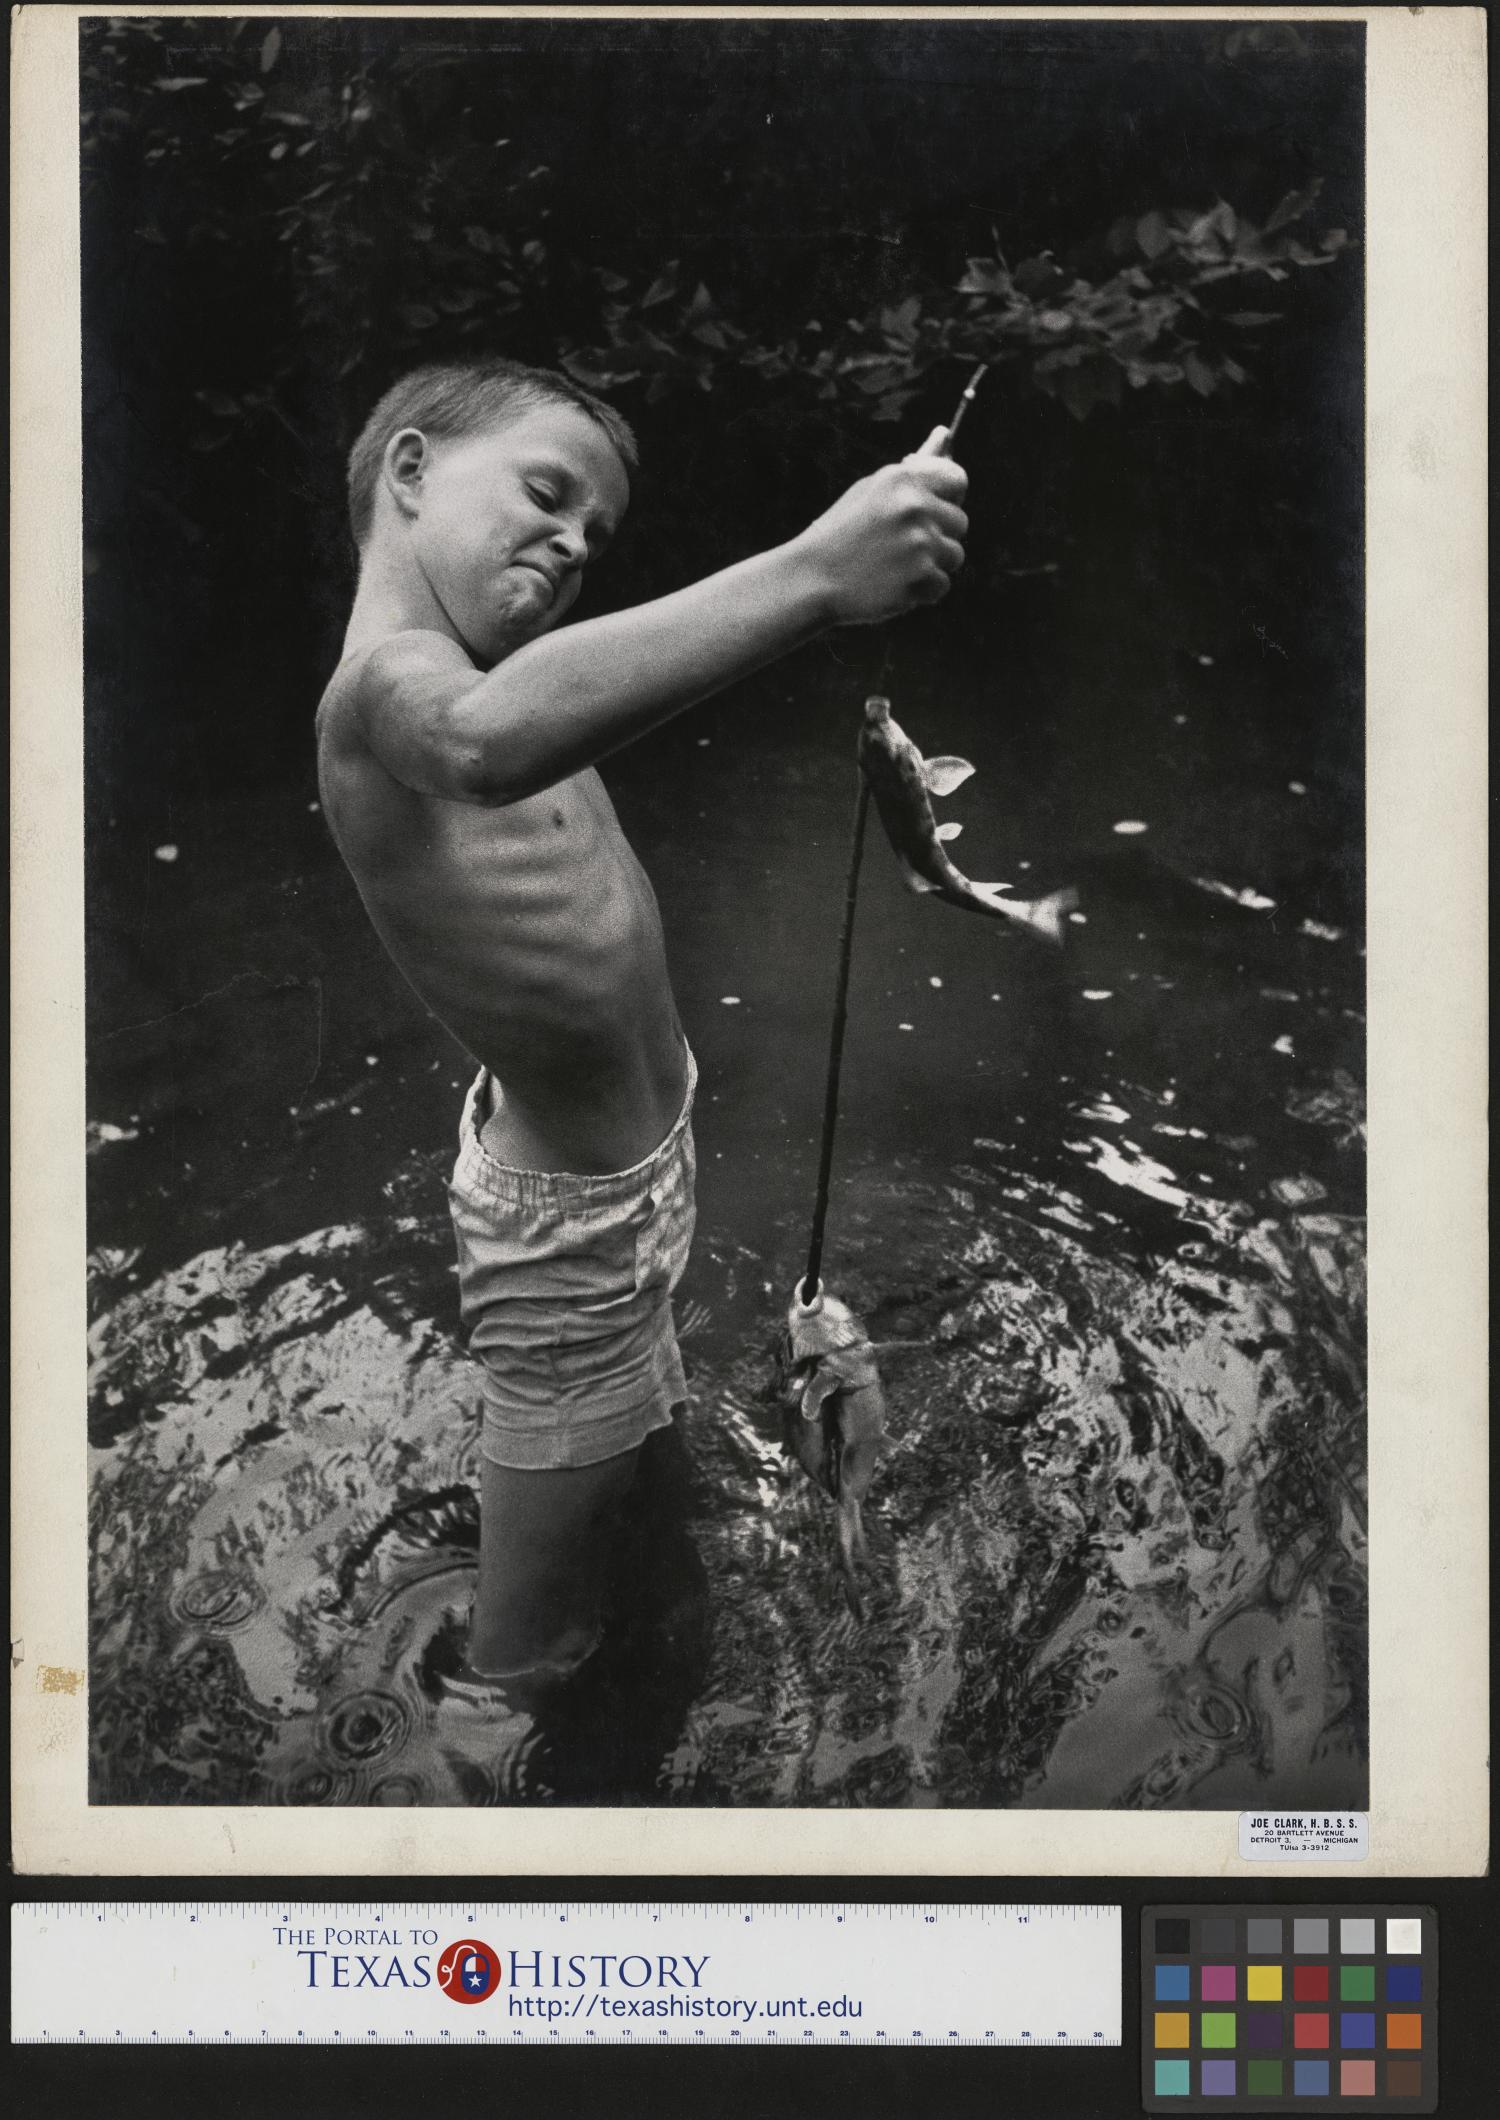 [Jimmy Powell Fishing], Photograph of an unidentified boy fishing, possibly in Lynchburg or Cumberland Gap, Tennessee. He wears shorts but no shirt and holds up his fish and pole., 